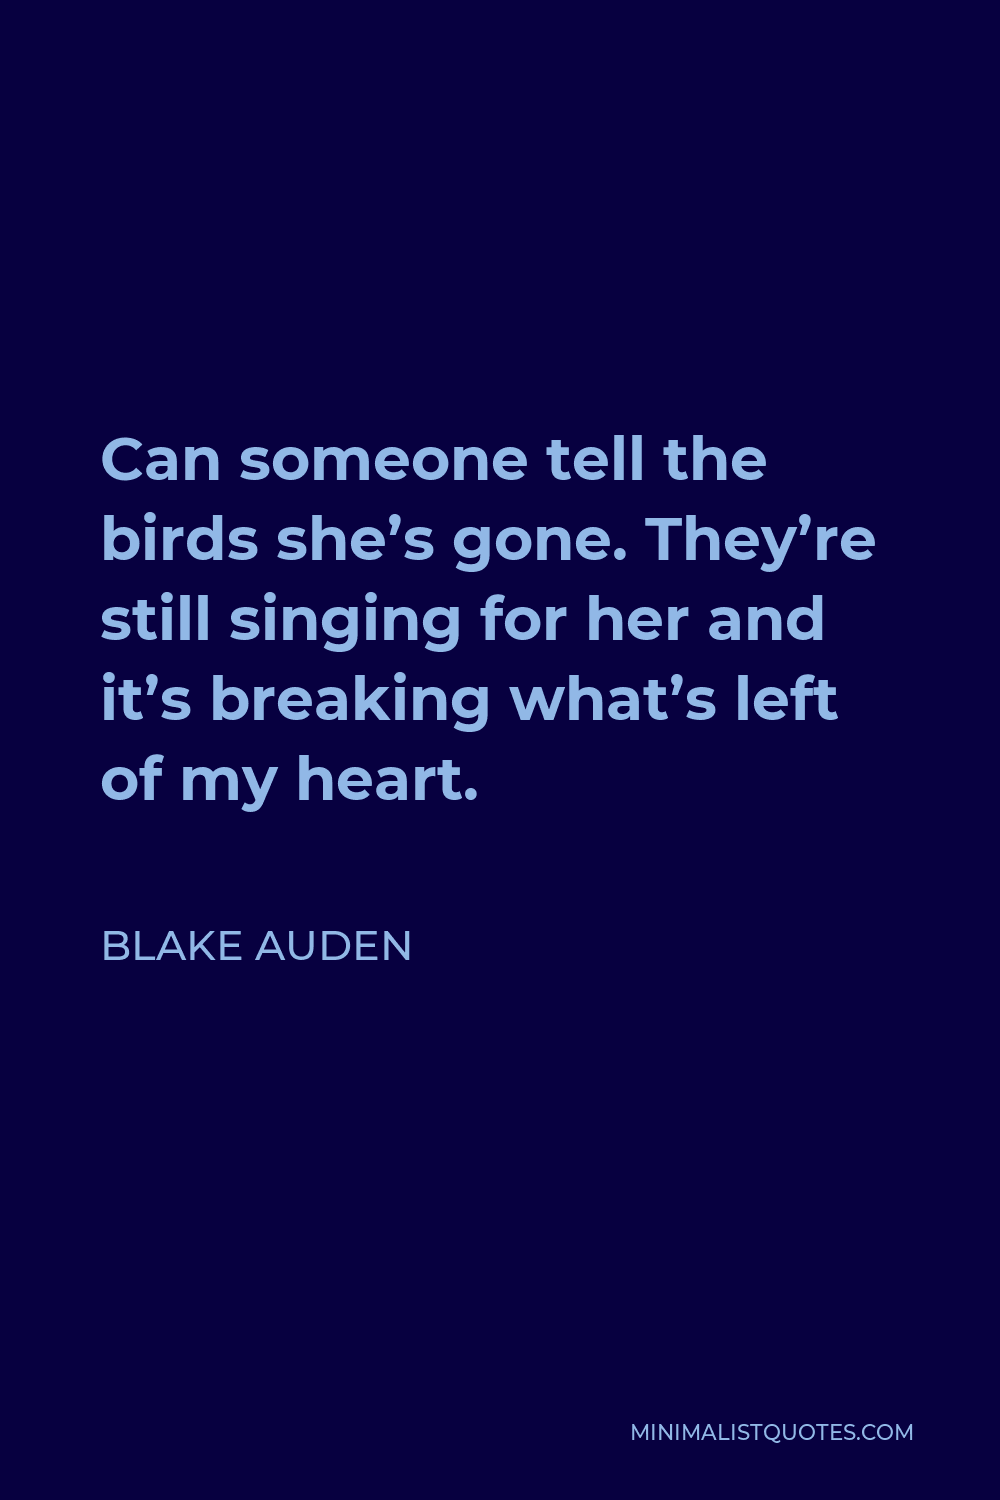 Blake Auden Quote - Can someone tell the birds she’s gone. They’re still singing for her and it’s breaking what’s left of my heart.